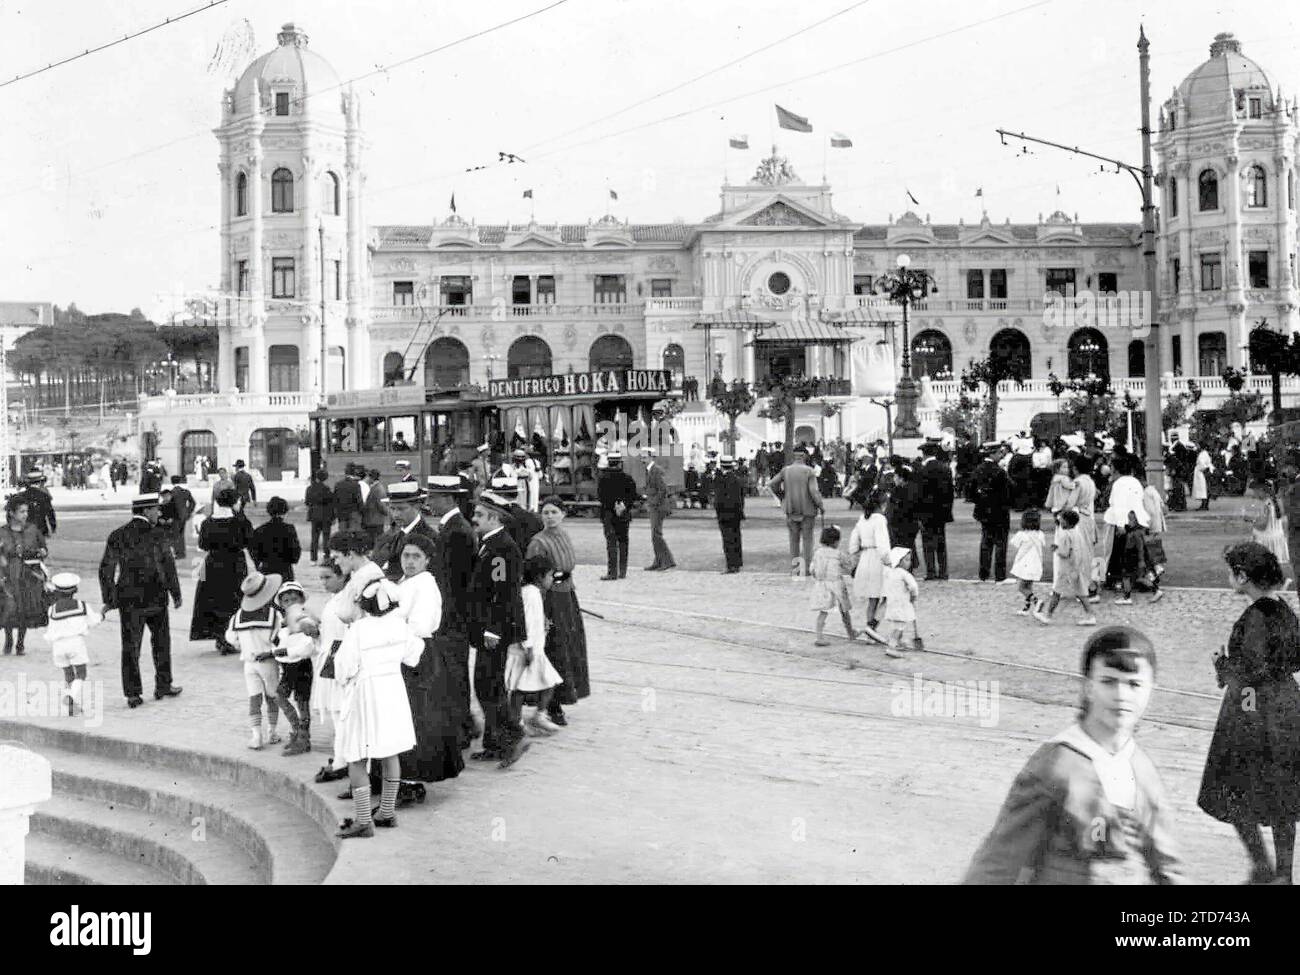 Santander, July 1917. The Gran Casino during the concerts of the magnificent orchestra conducted by maestro Saco del Valle. Credit: Album / Archivo ABC / Duomarco Stock Photo